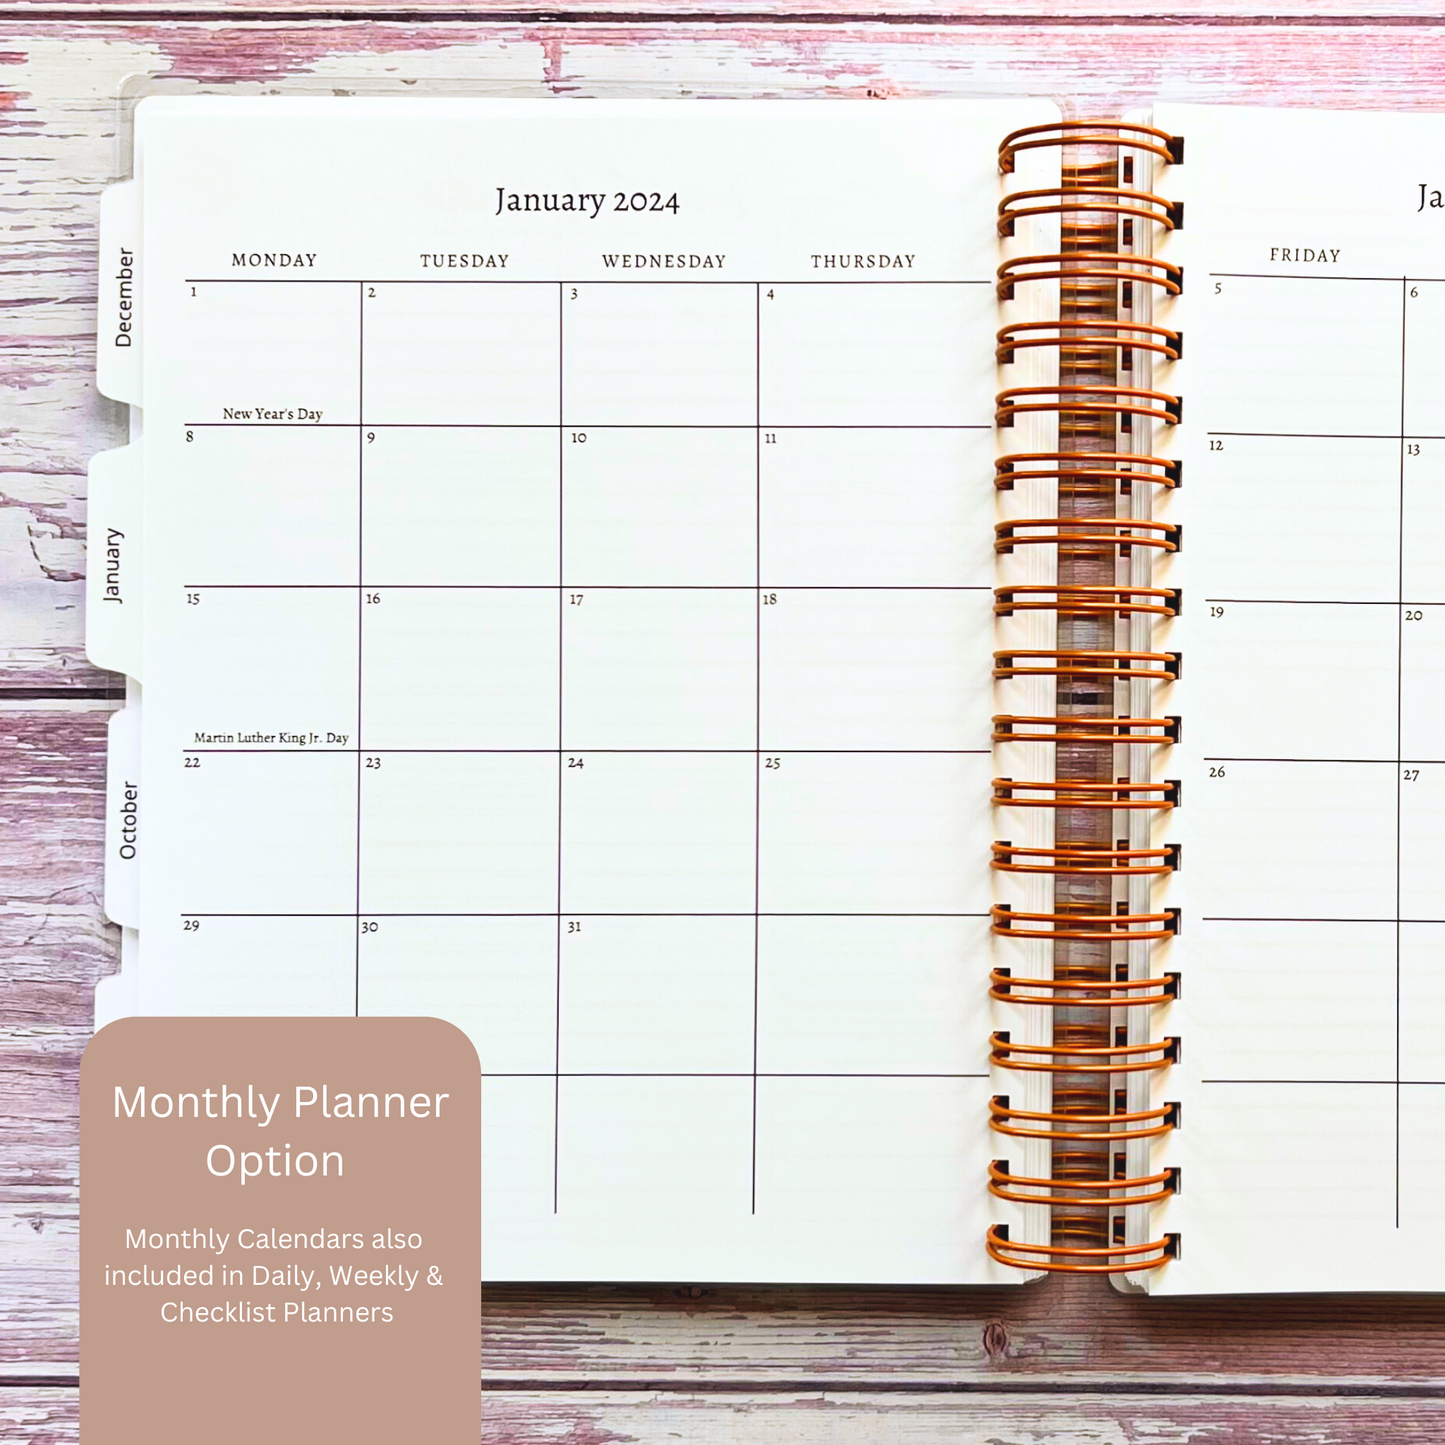 Personalized Weekly Planner | Floral Peacock